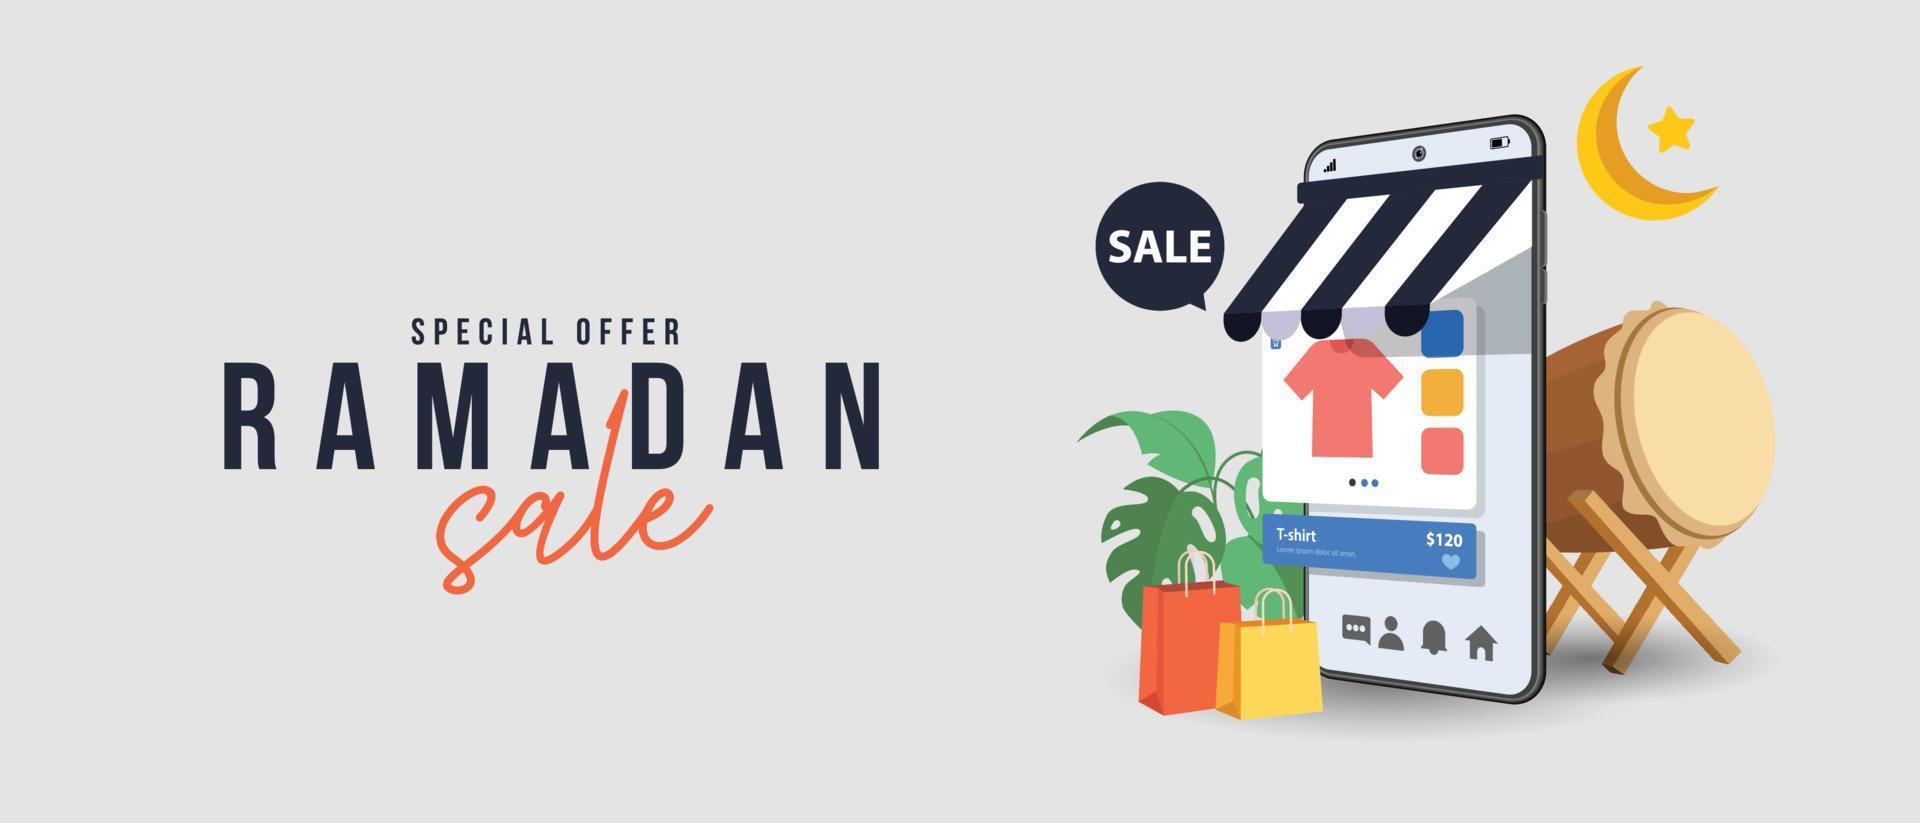 Ramadan sale, web header design with Islamic festival for banner, poster, background, flyer,illustration, brochure and sale background vector